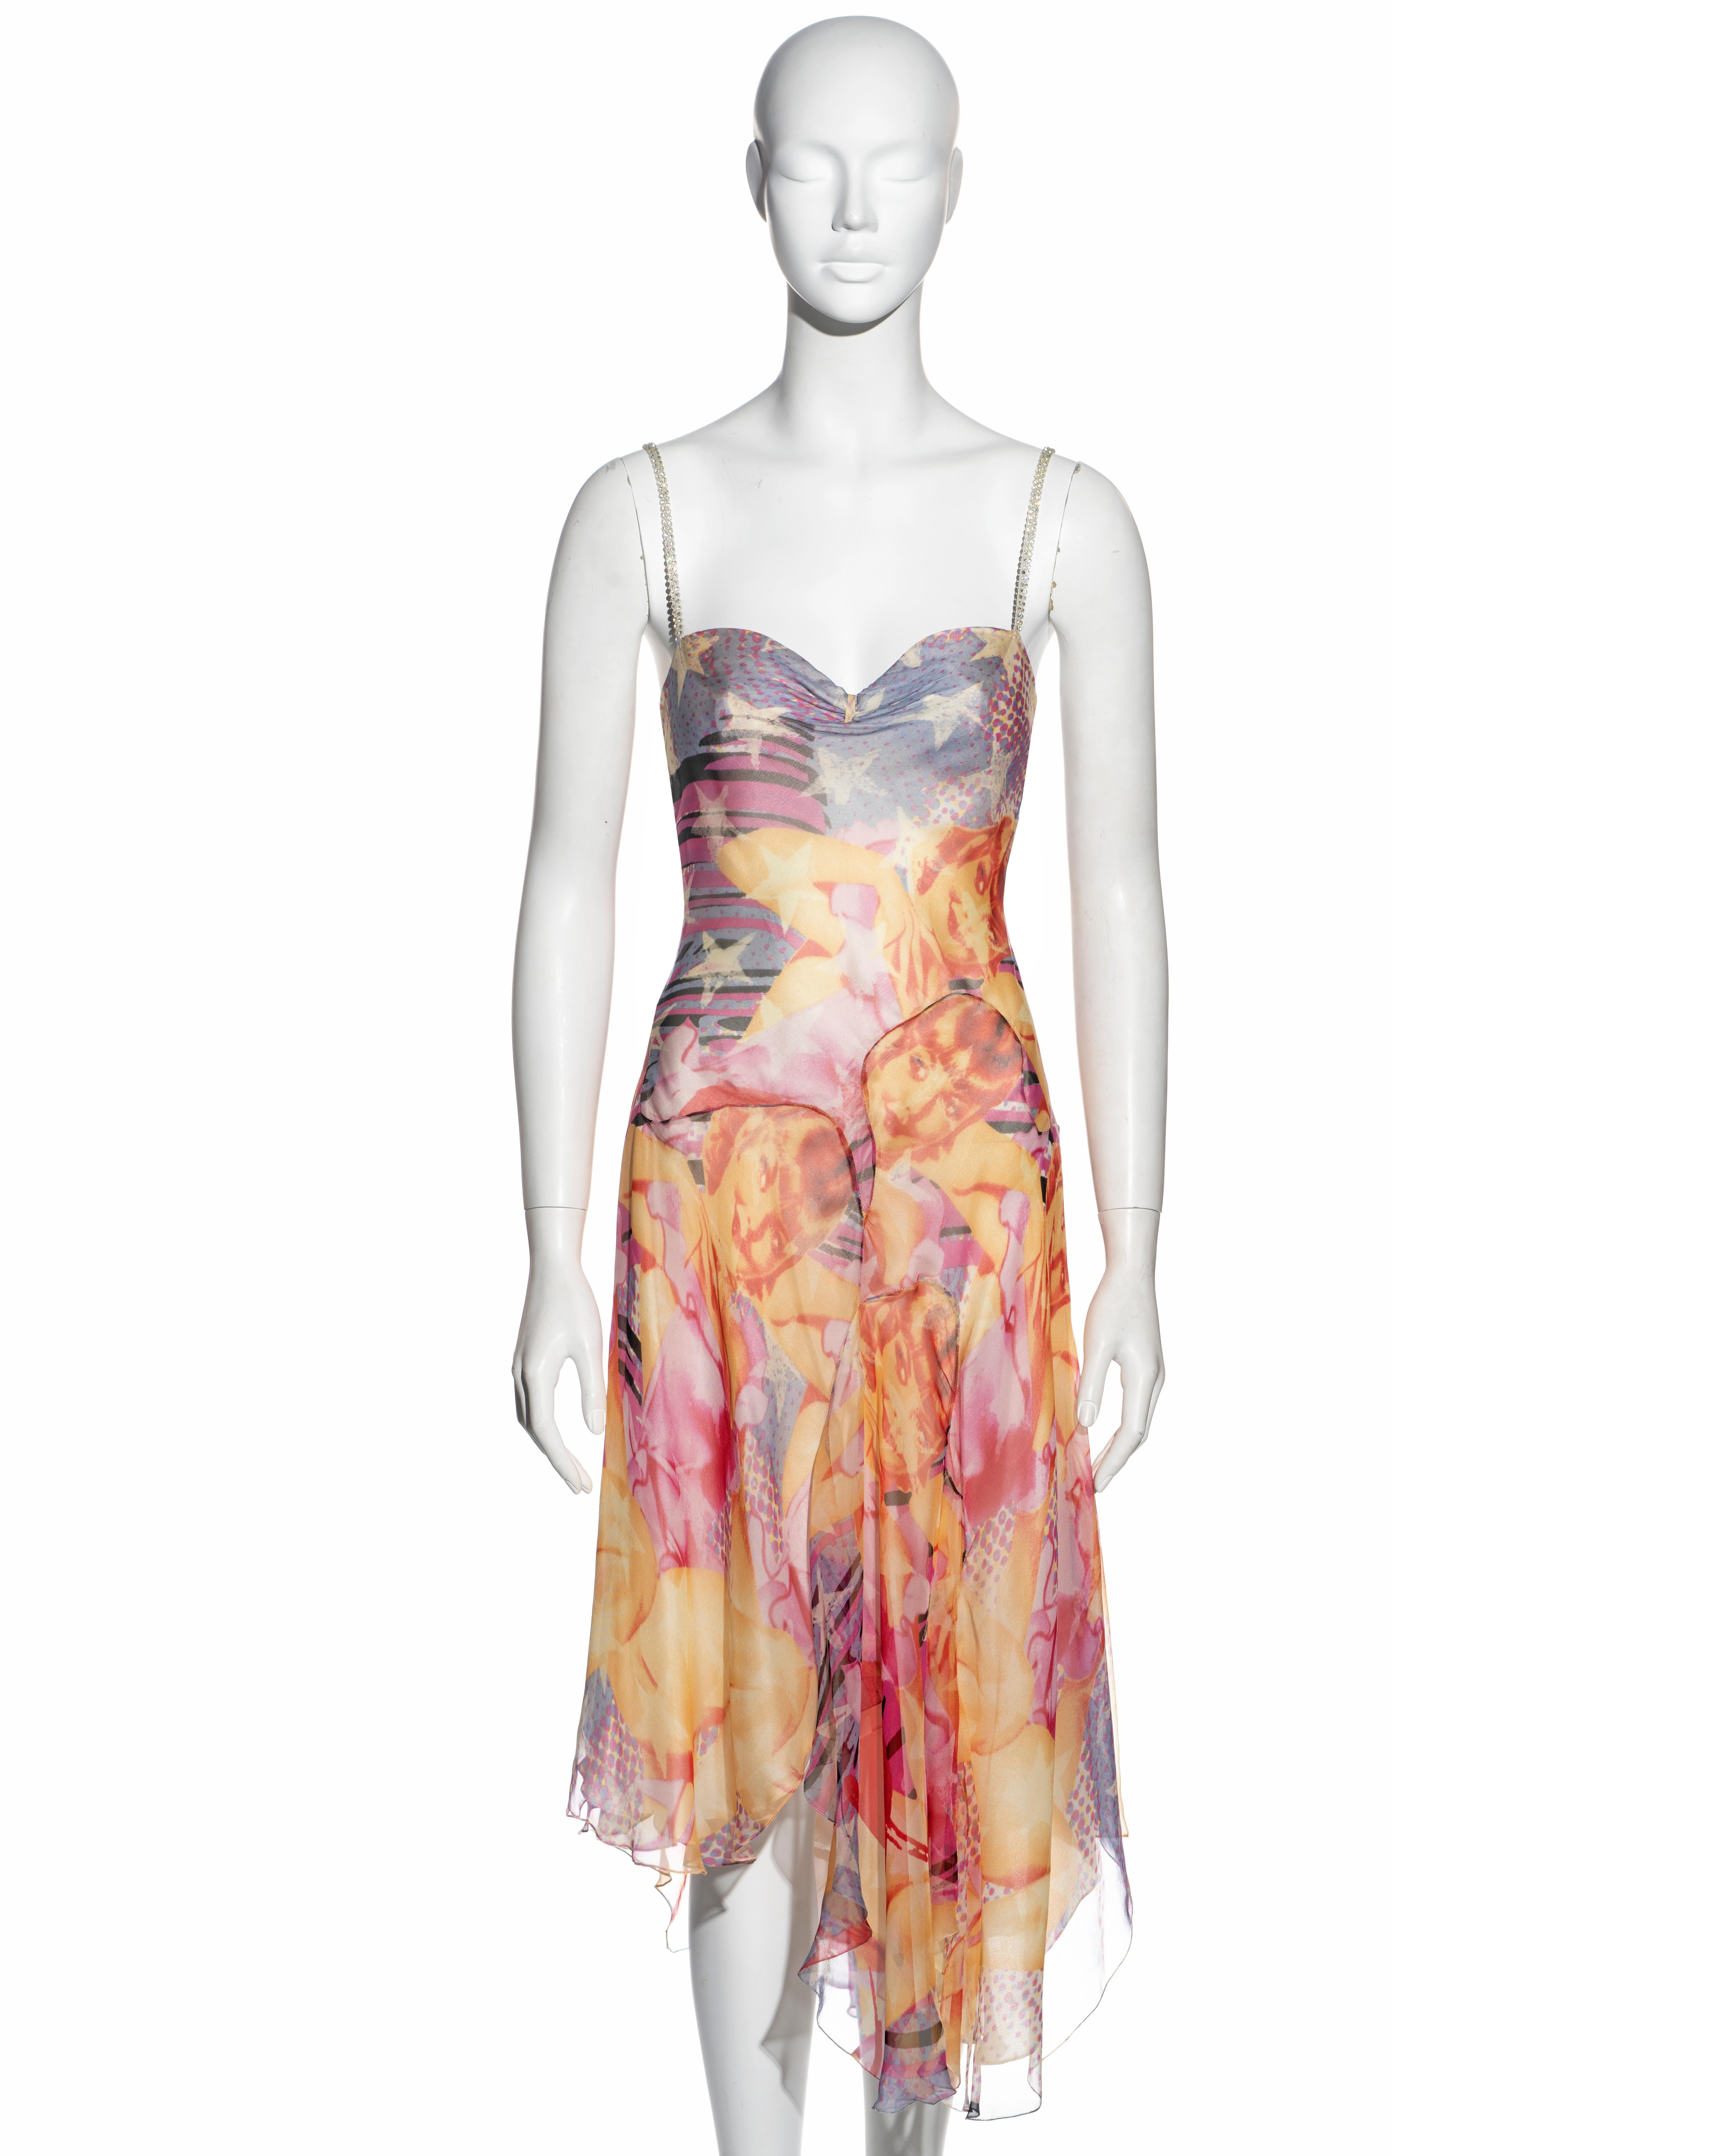 ▪ Alexander McQueen evening dress 
▪ Sold by One of a Kind Archive
▪ Constructed from bias-cut silk chiffon panels with a multicoloured collage print 
▪ Crystal shoulder straps 
▪ Asymmetric hemline 
▪ IT 40 - FR 36 - UK 8 - US 4
▪ Spring-Summer